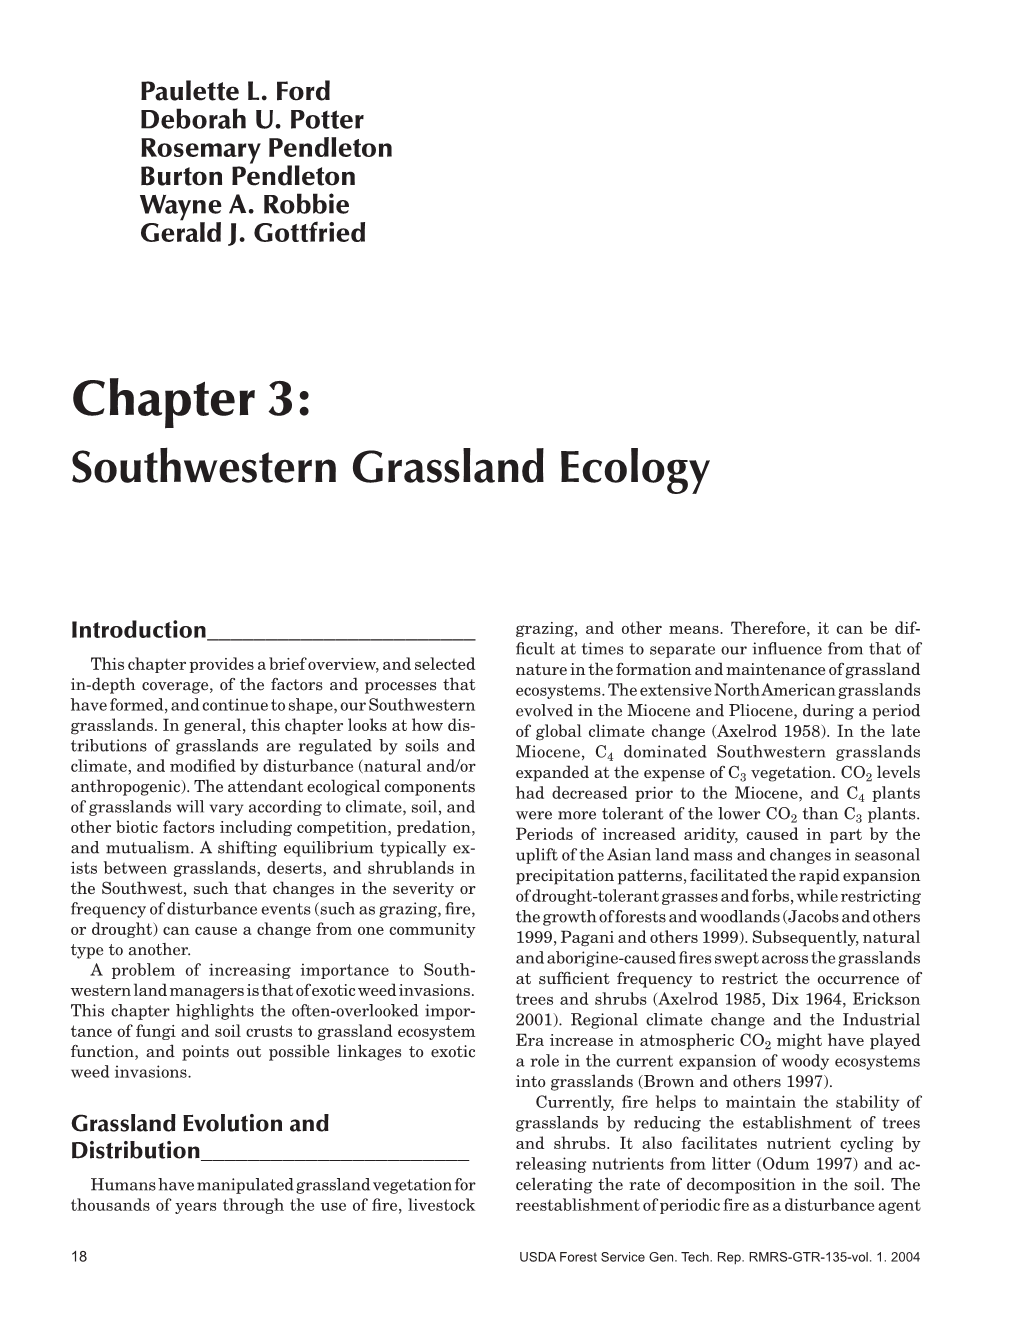 Assessment of Grassland Ecosystem Conditions